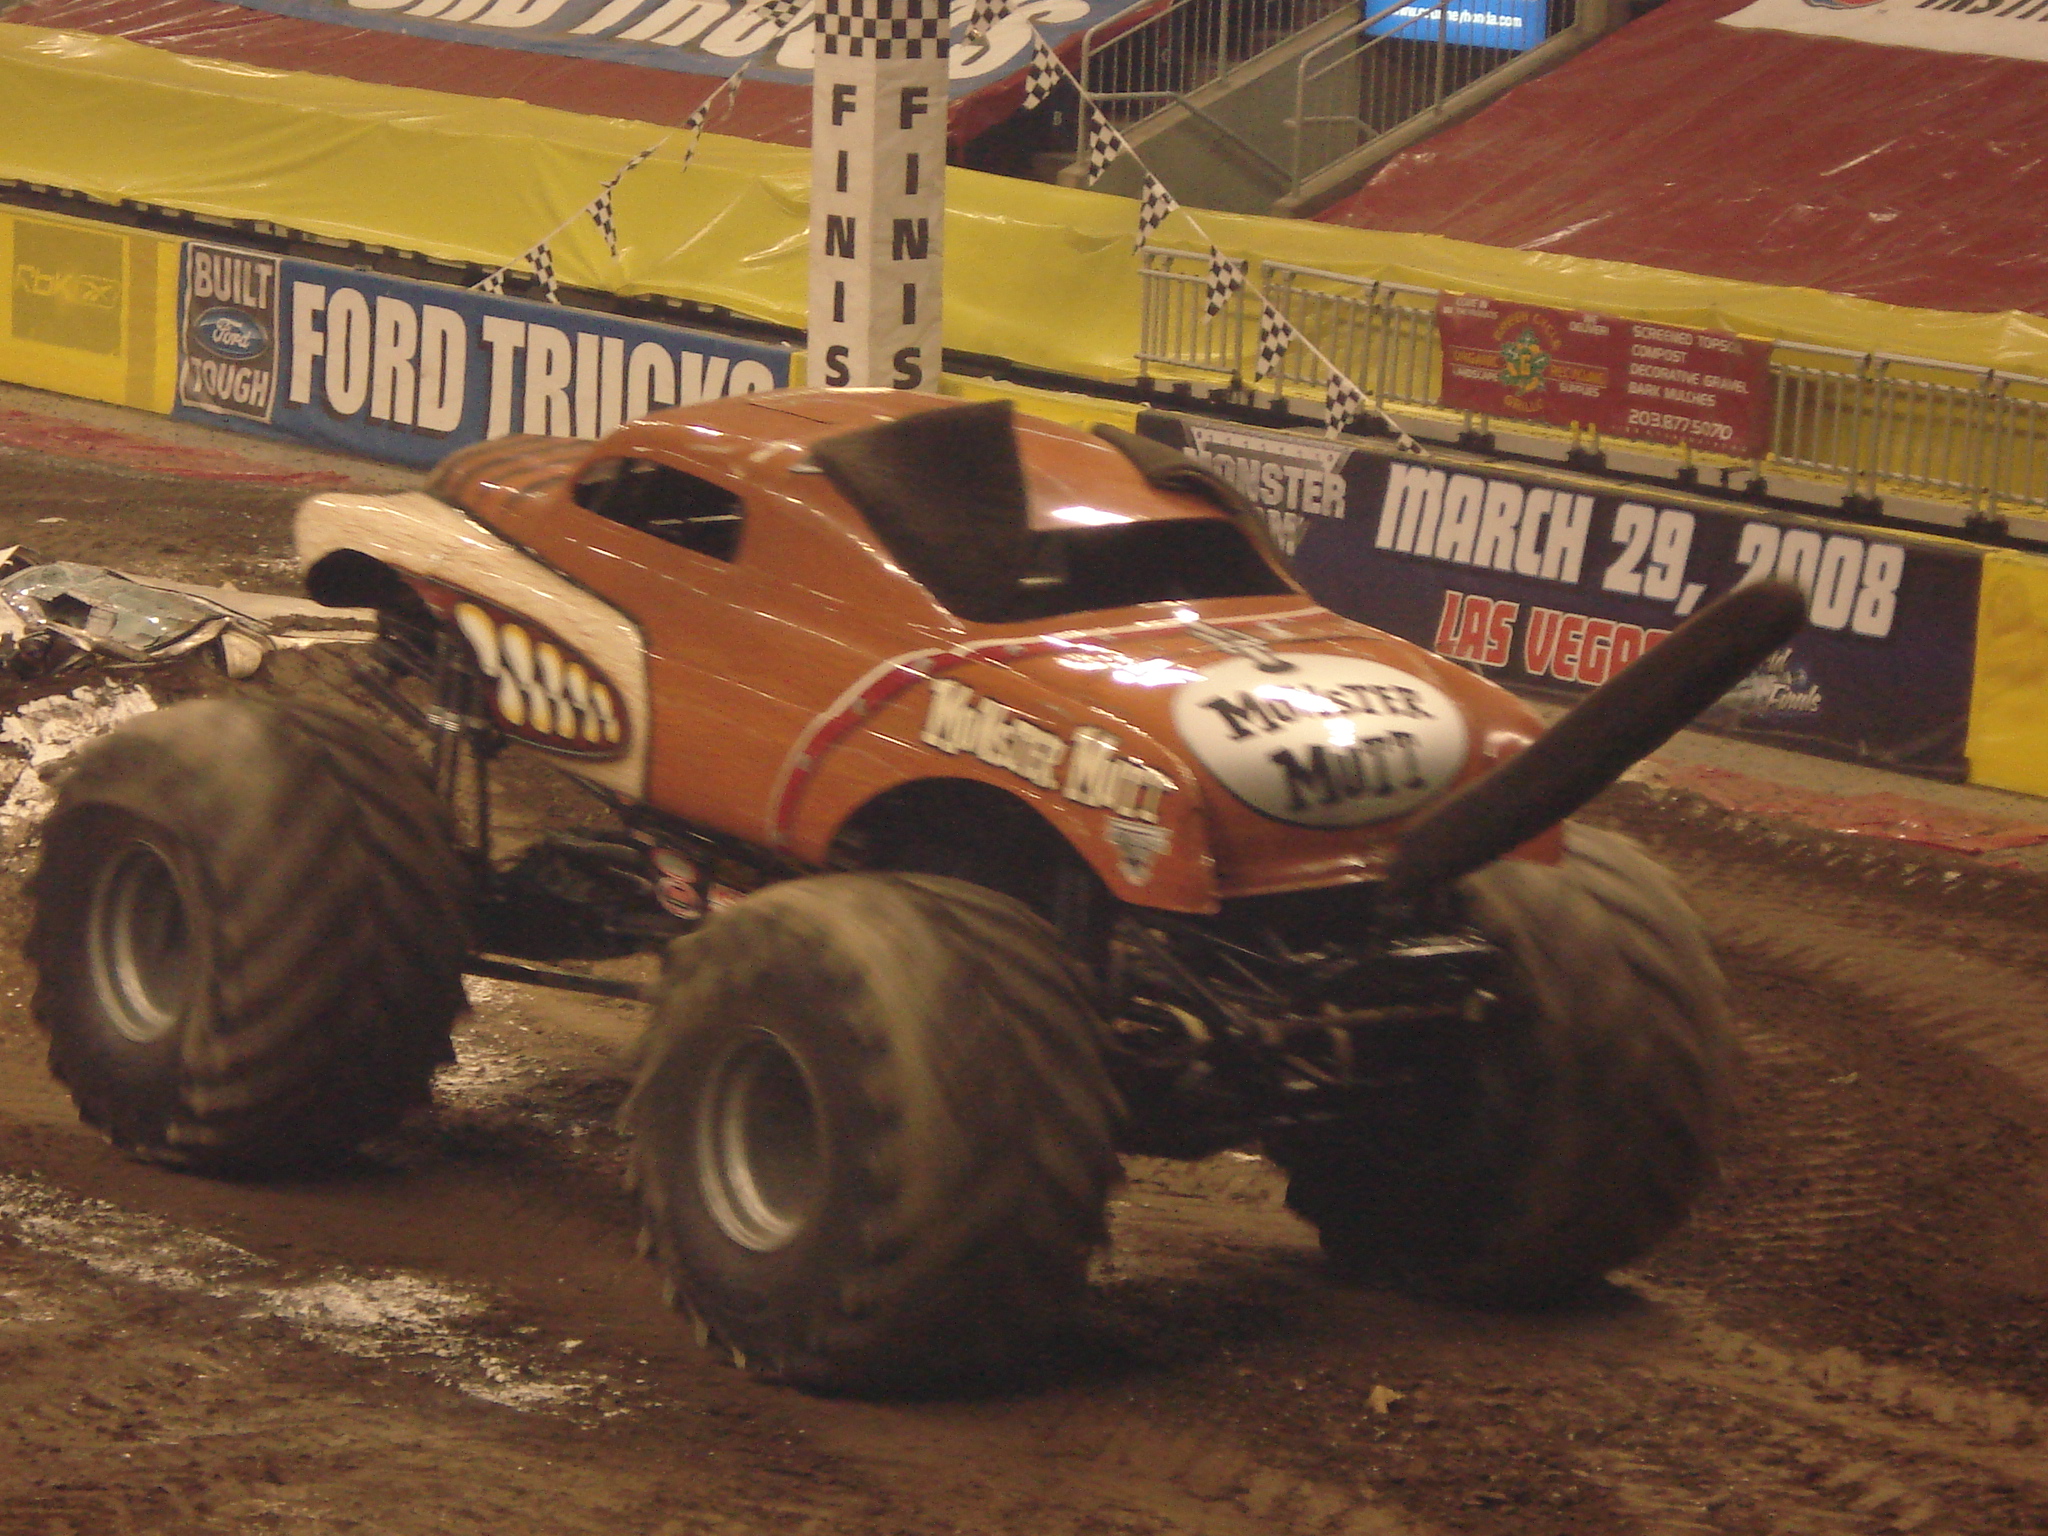 two large, off - road trucks are doing tricks in an arena